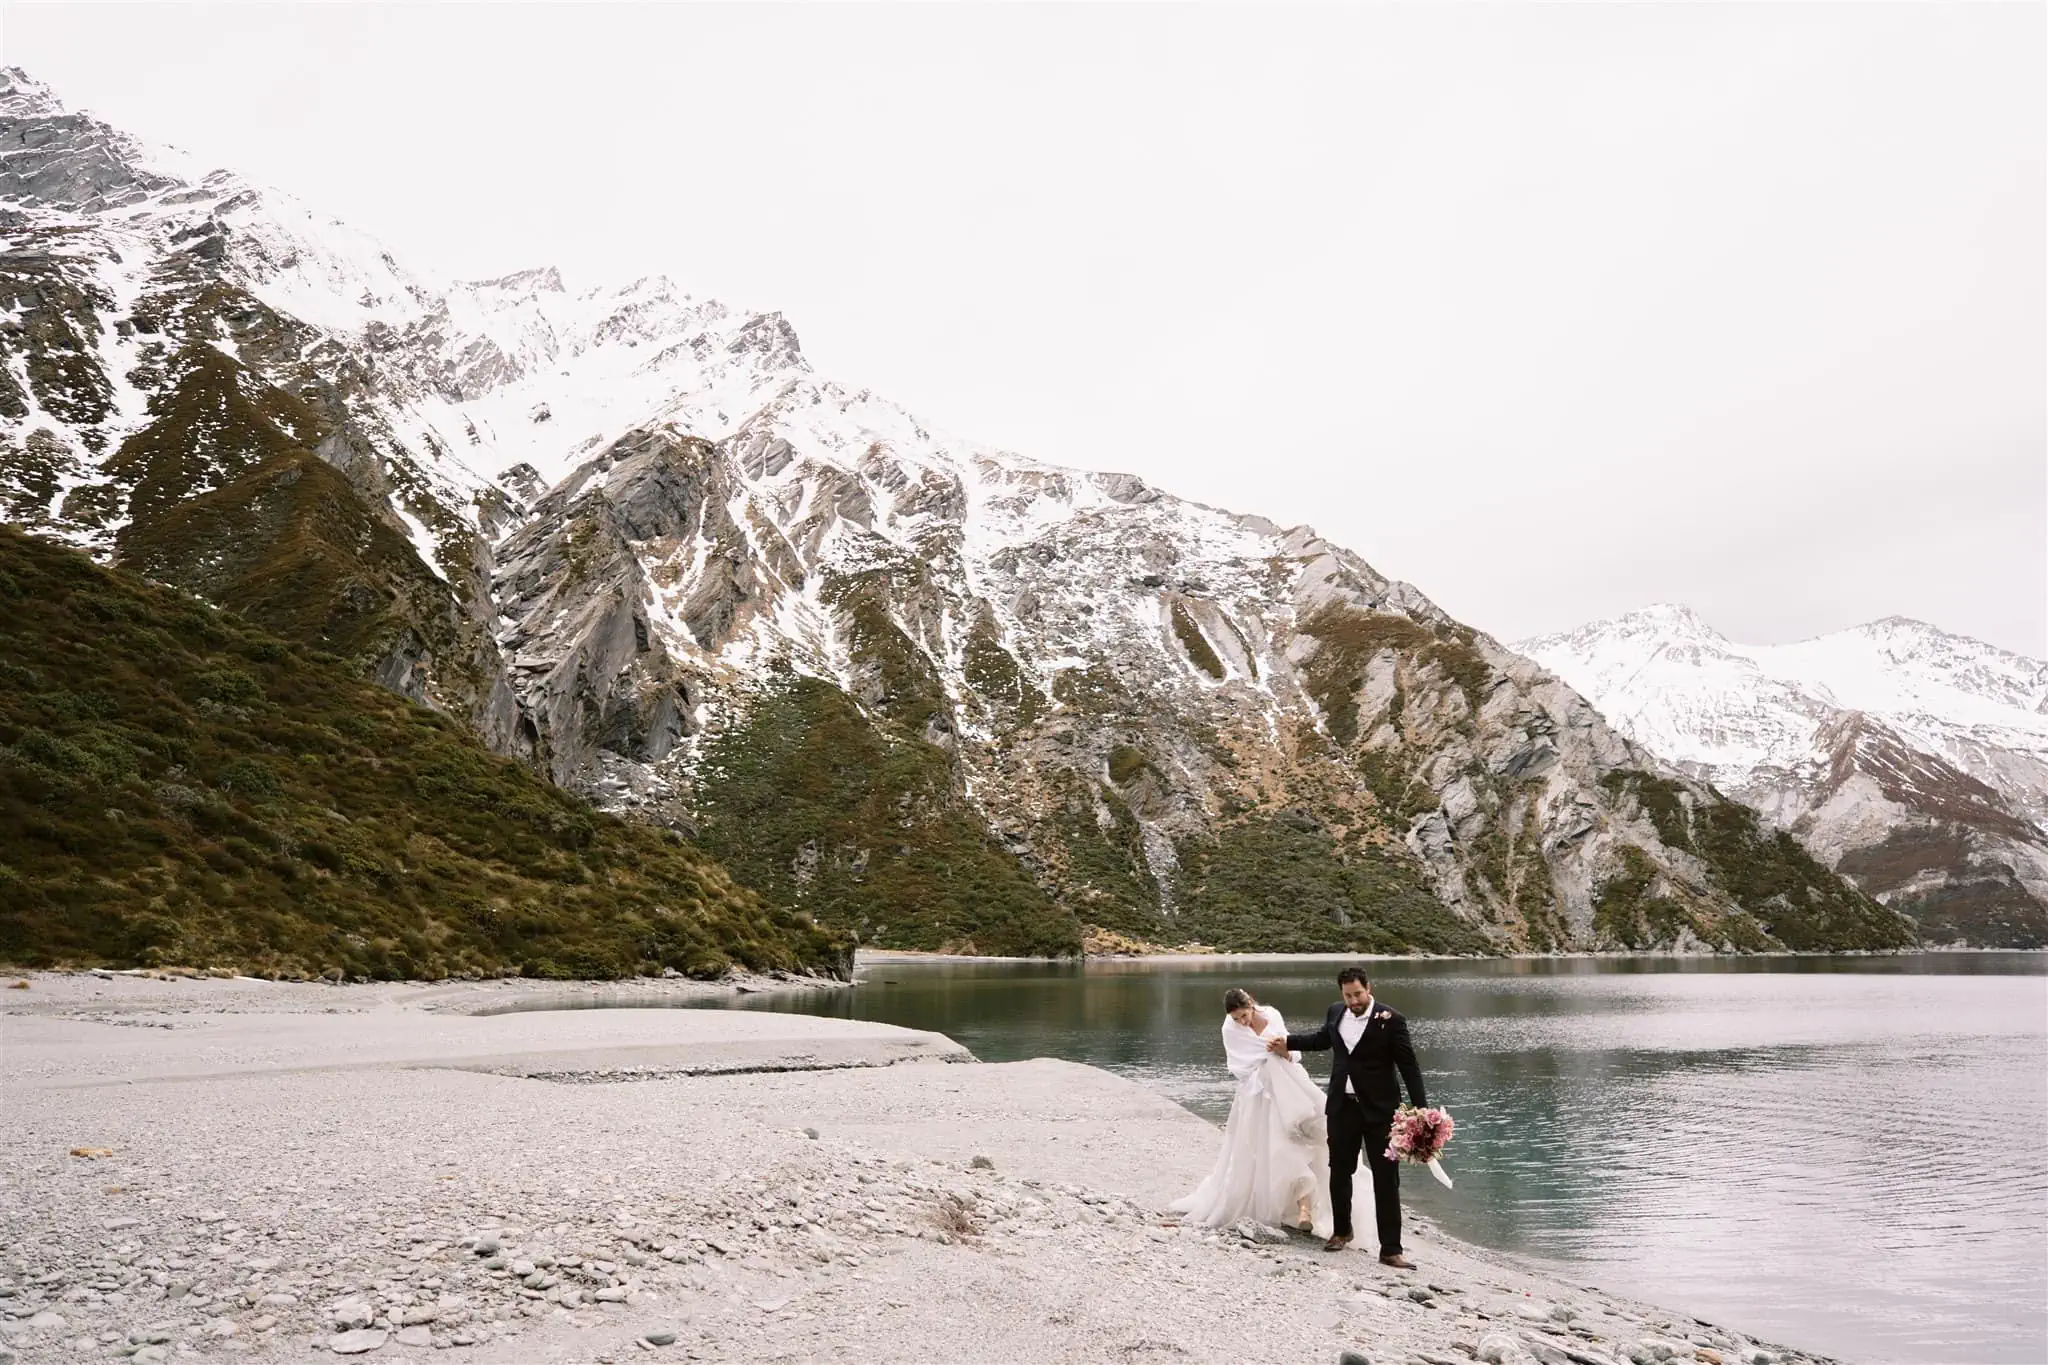 Queenstown New Zealand Elopement Wedding Photographer - Alex & Shahar, a bride and groom, enjoying a Stargazing Date on the shore of a lake in Queenstown, New Zealand for their romantic Queenstown Elopement.